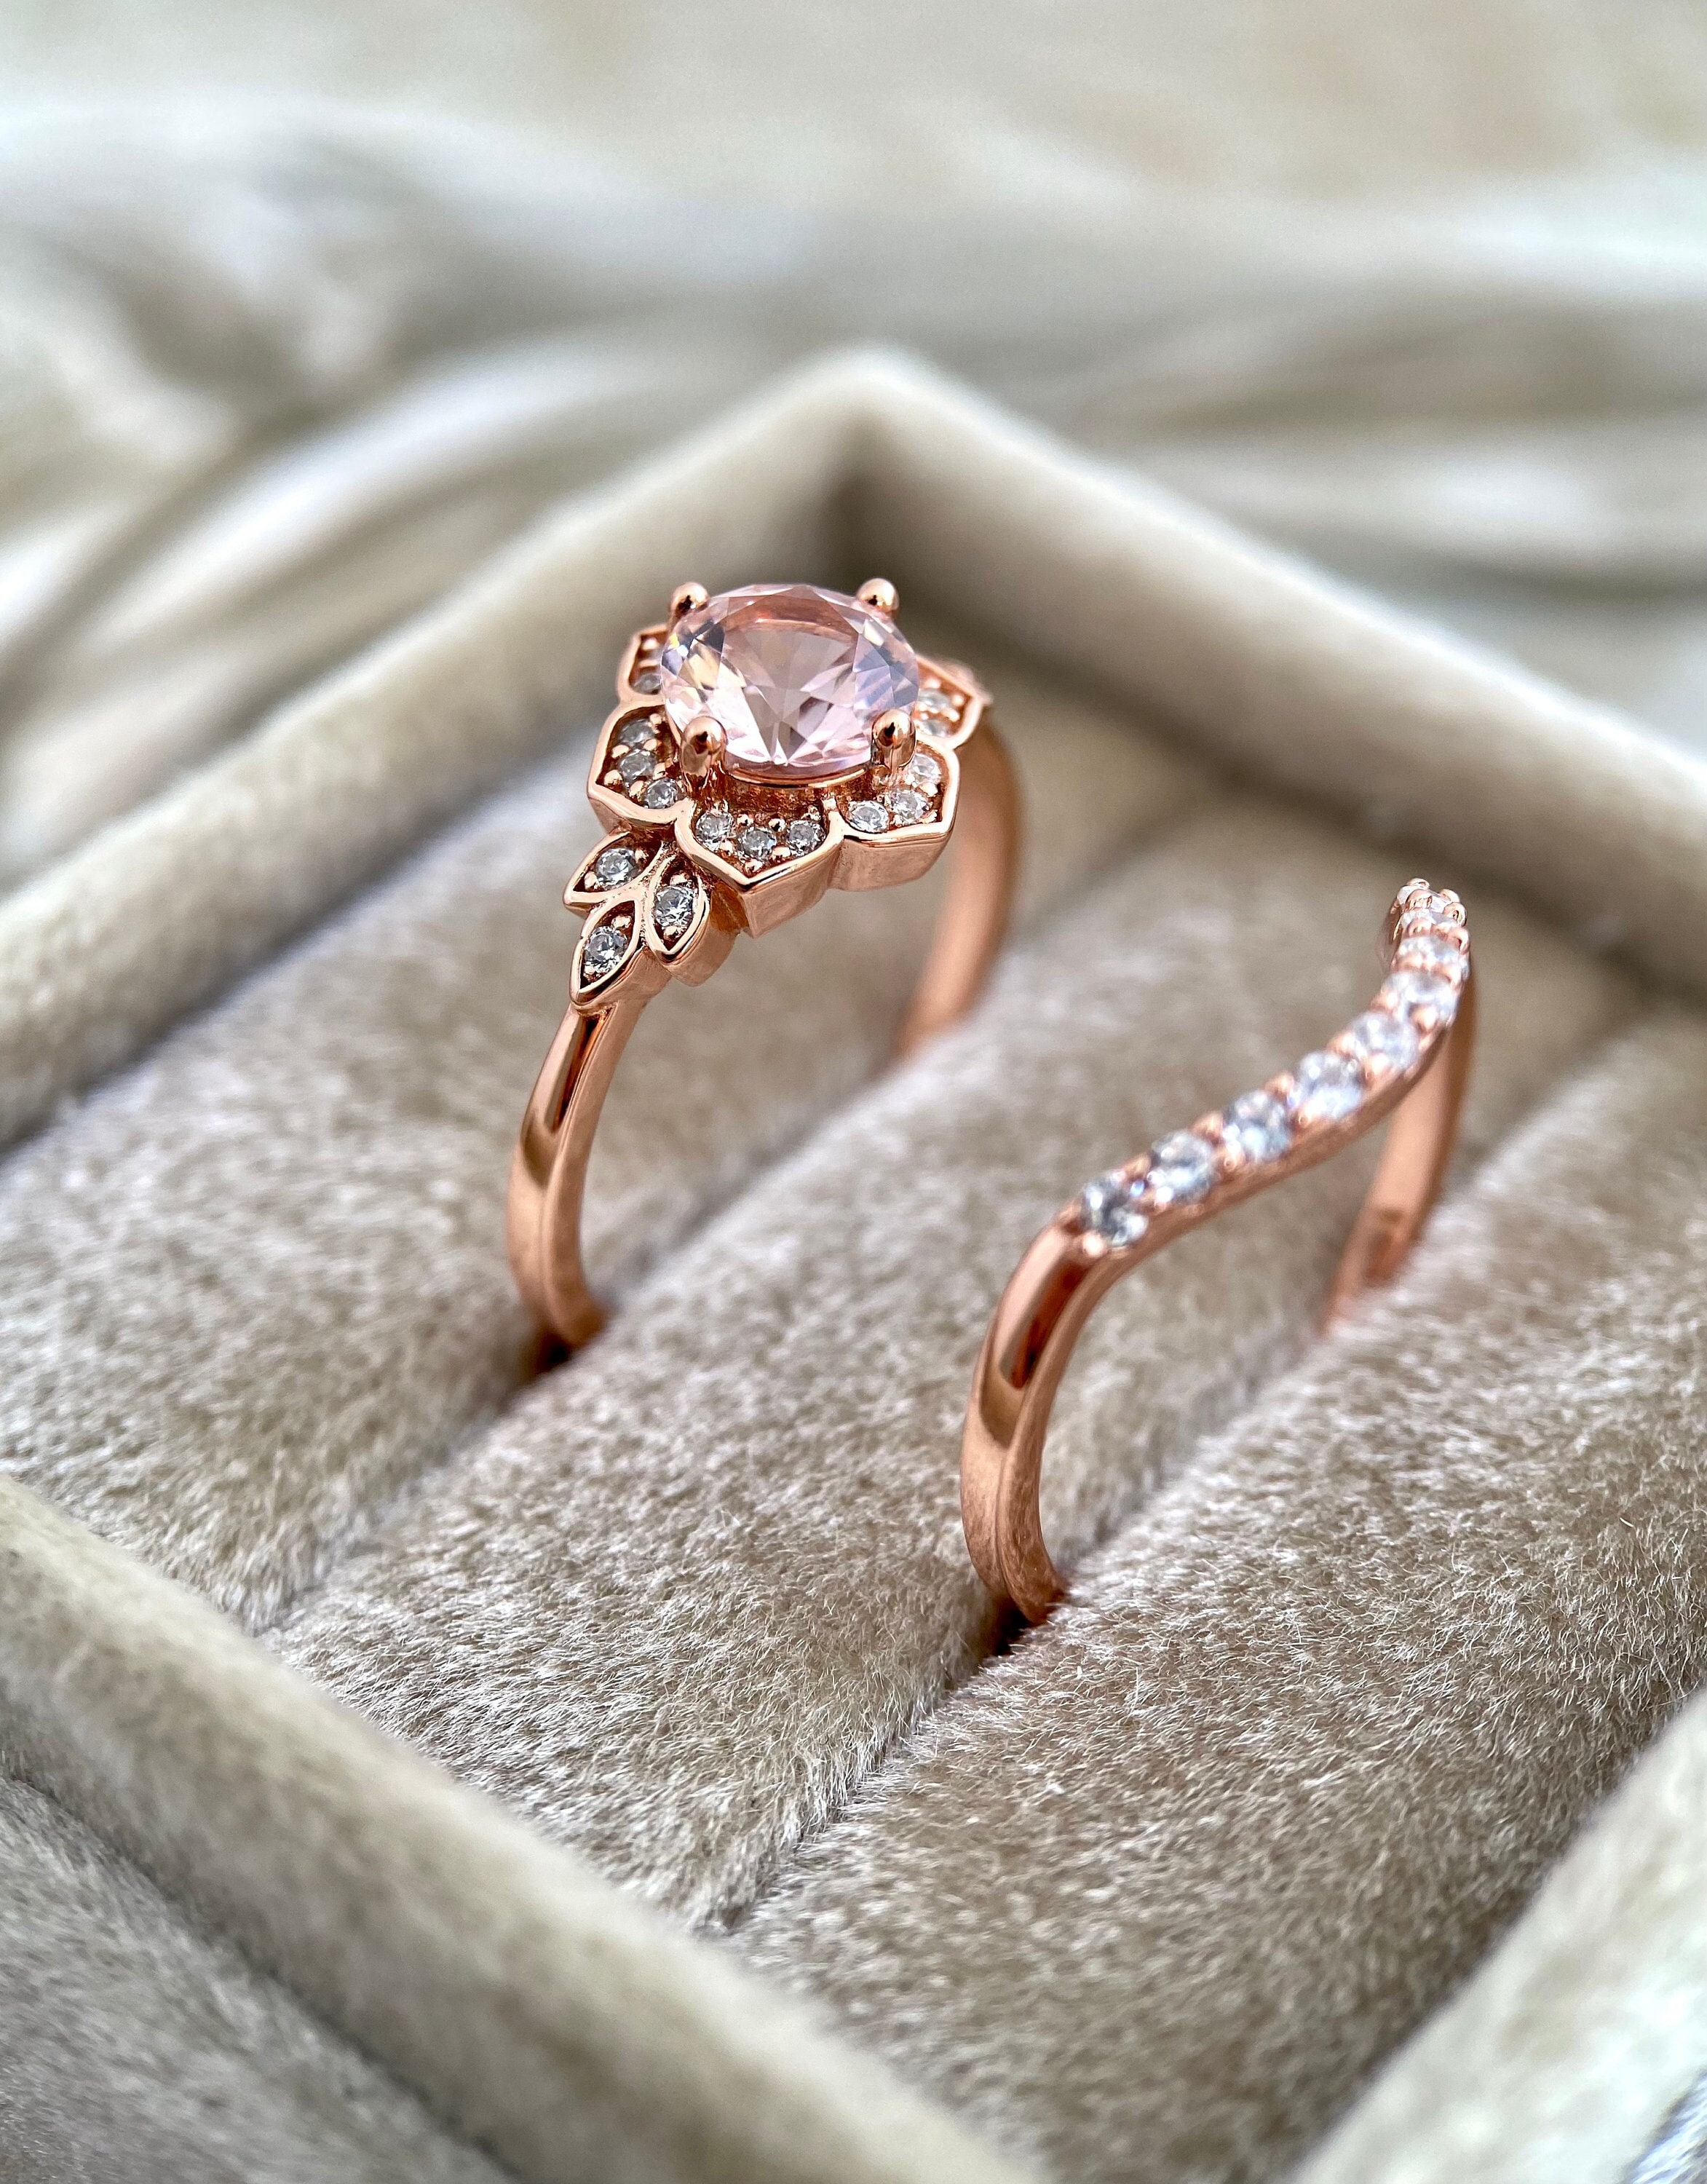 Monogram Infini Engagement Ring, Pink Gold And Diamond - Categories